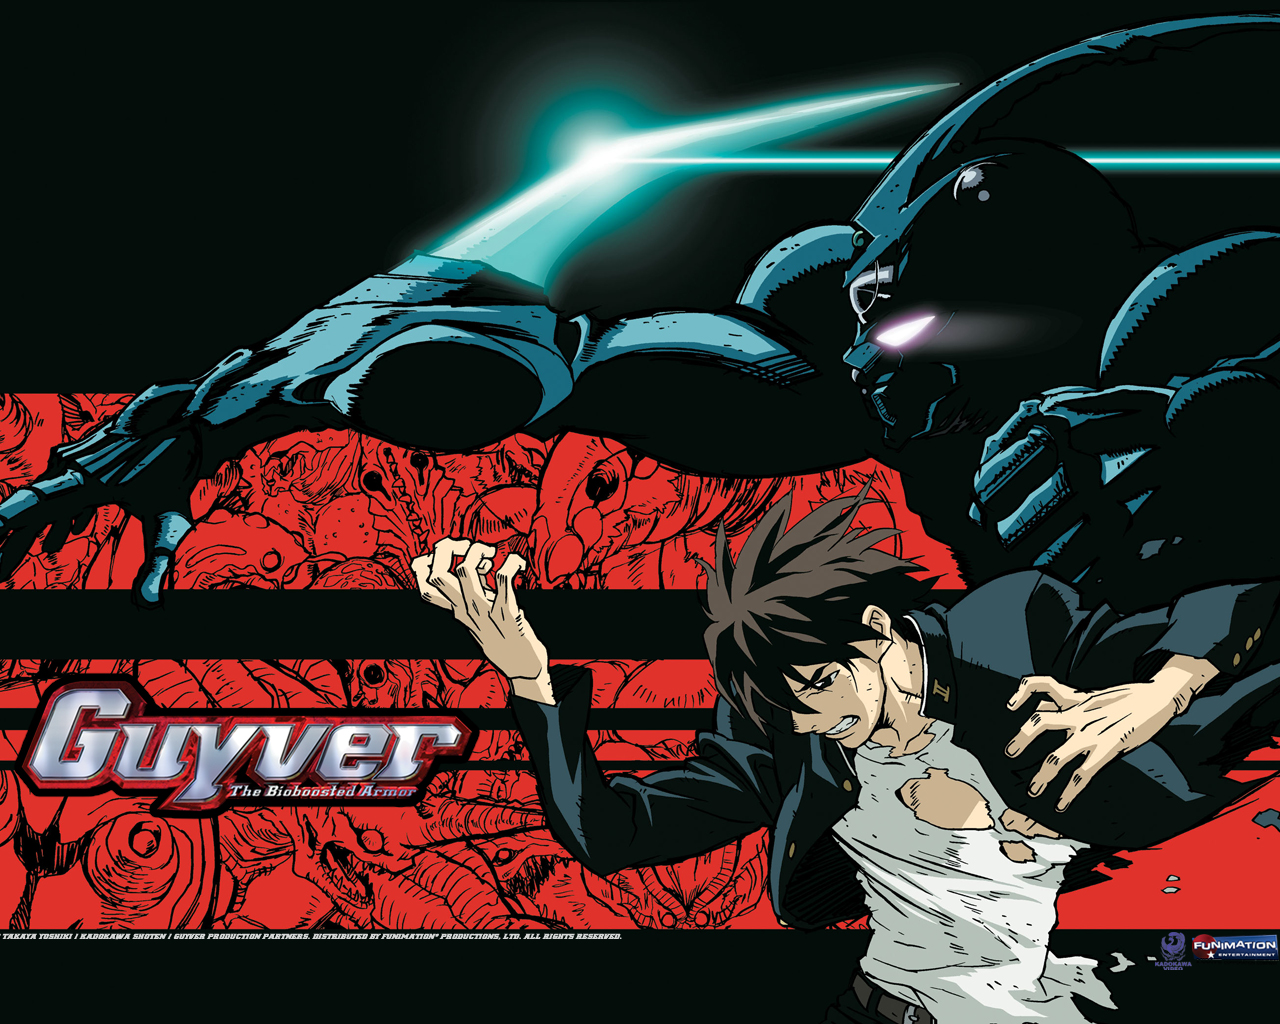 Guyver The Bioboosted Armor Wallpaper And Background Image